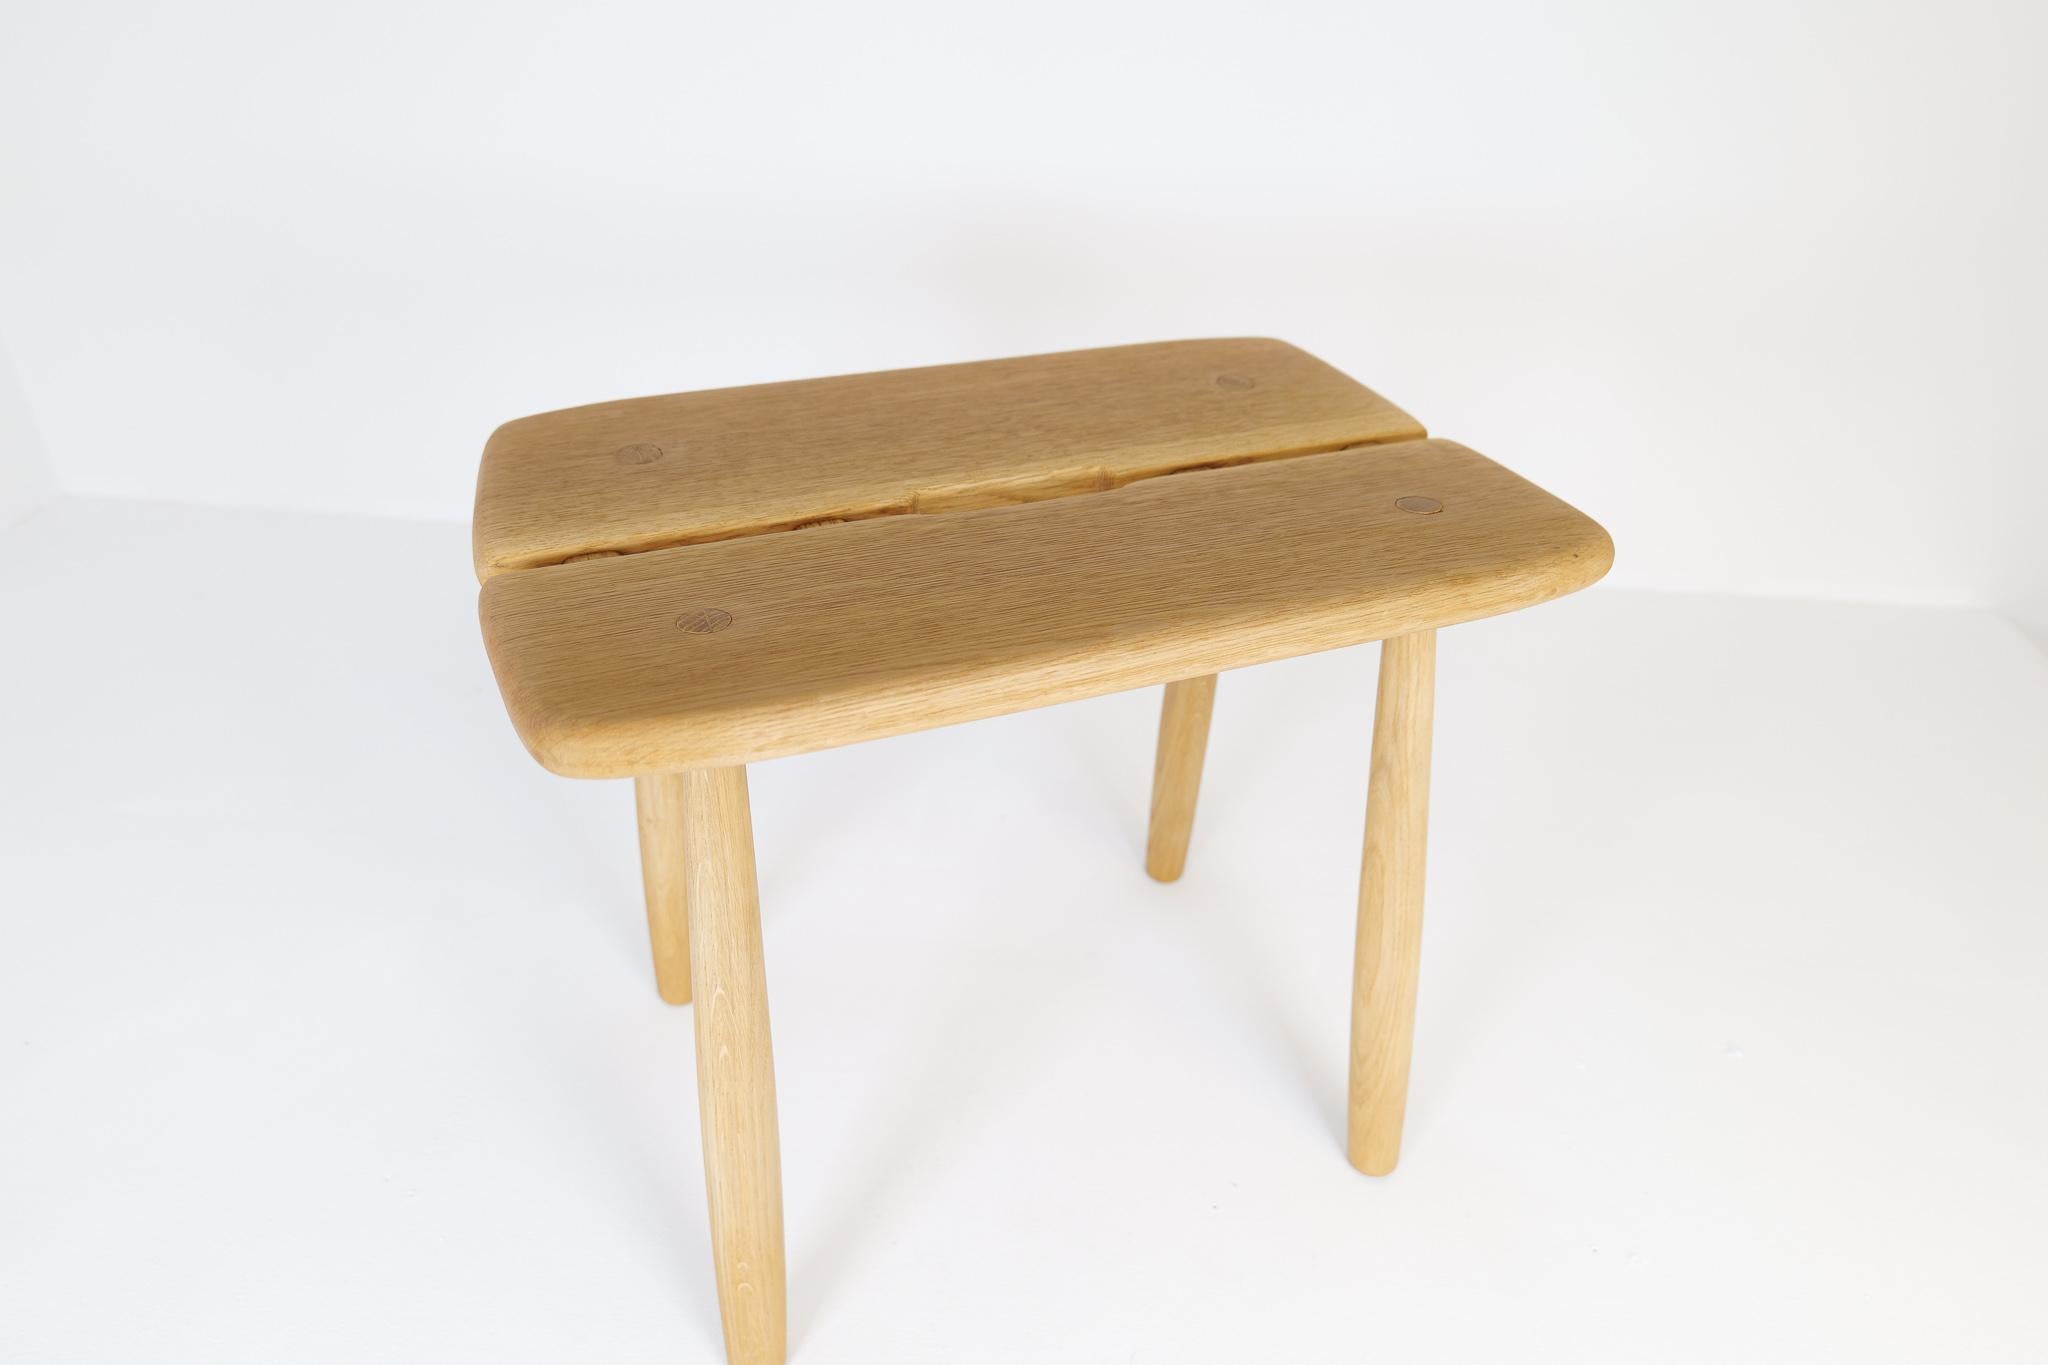 Mid-20th Century Midcentury Sculptural Stool in Solid Oak by Carl Gustaf Boulogner Sweden 1950s For Sale